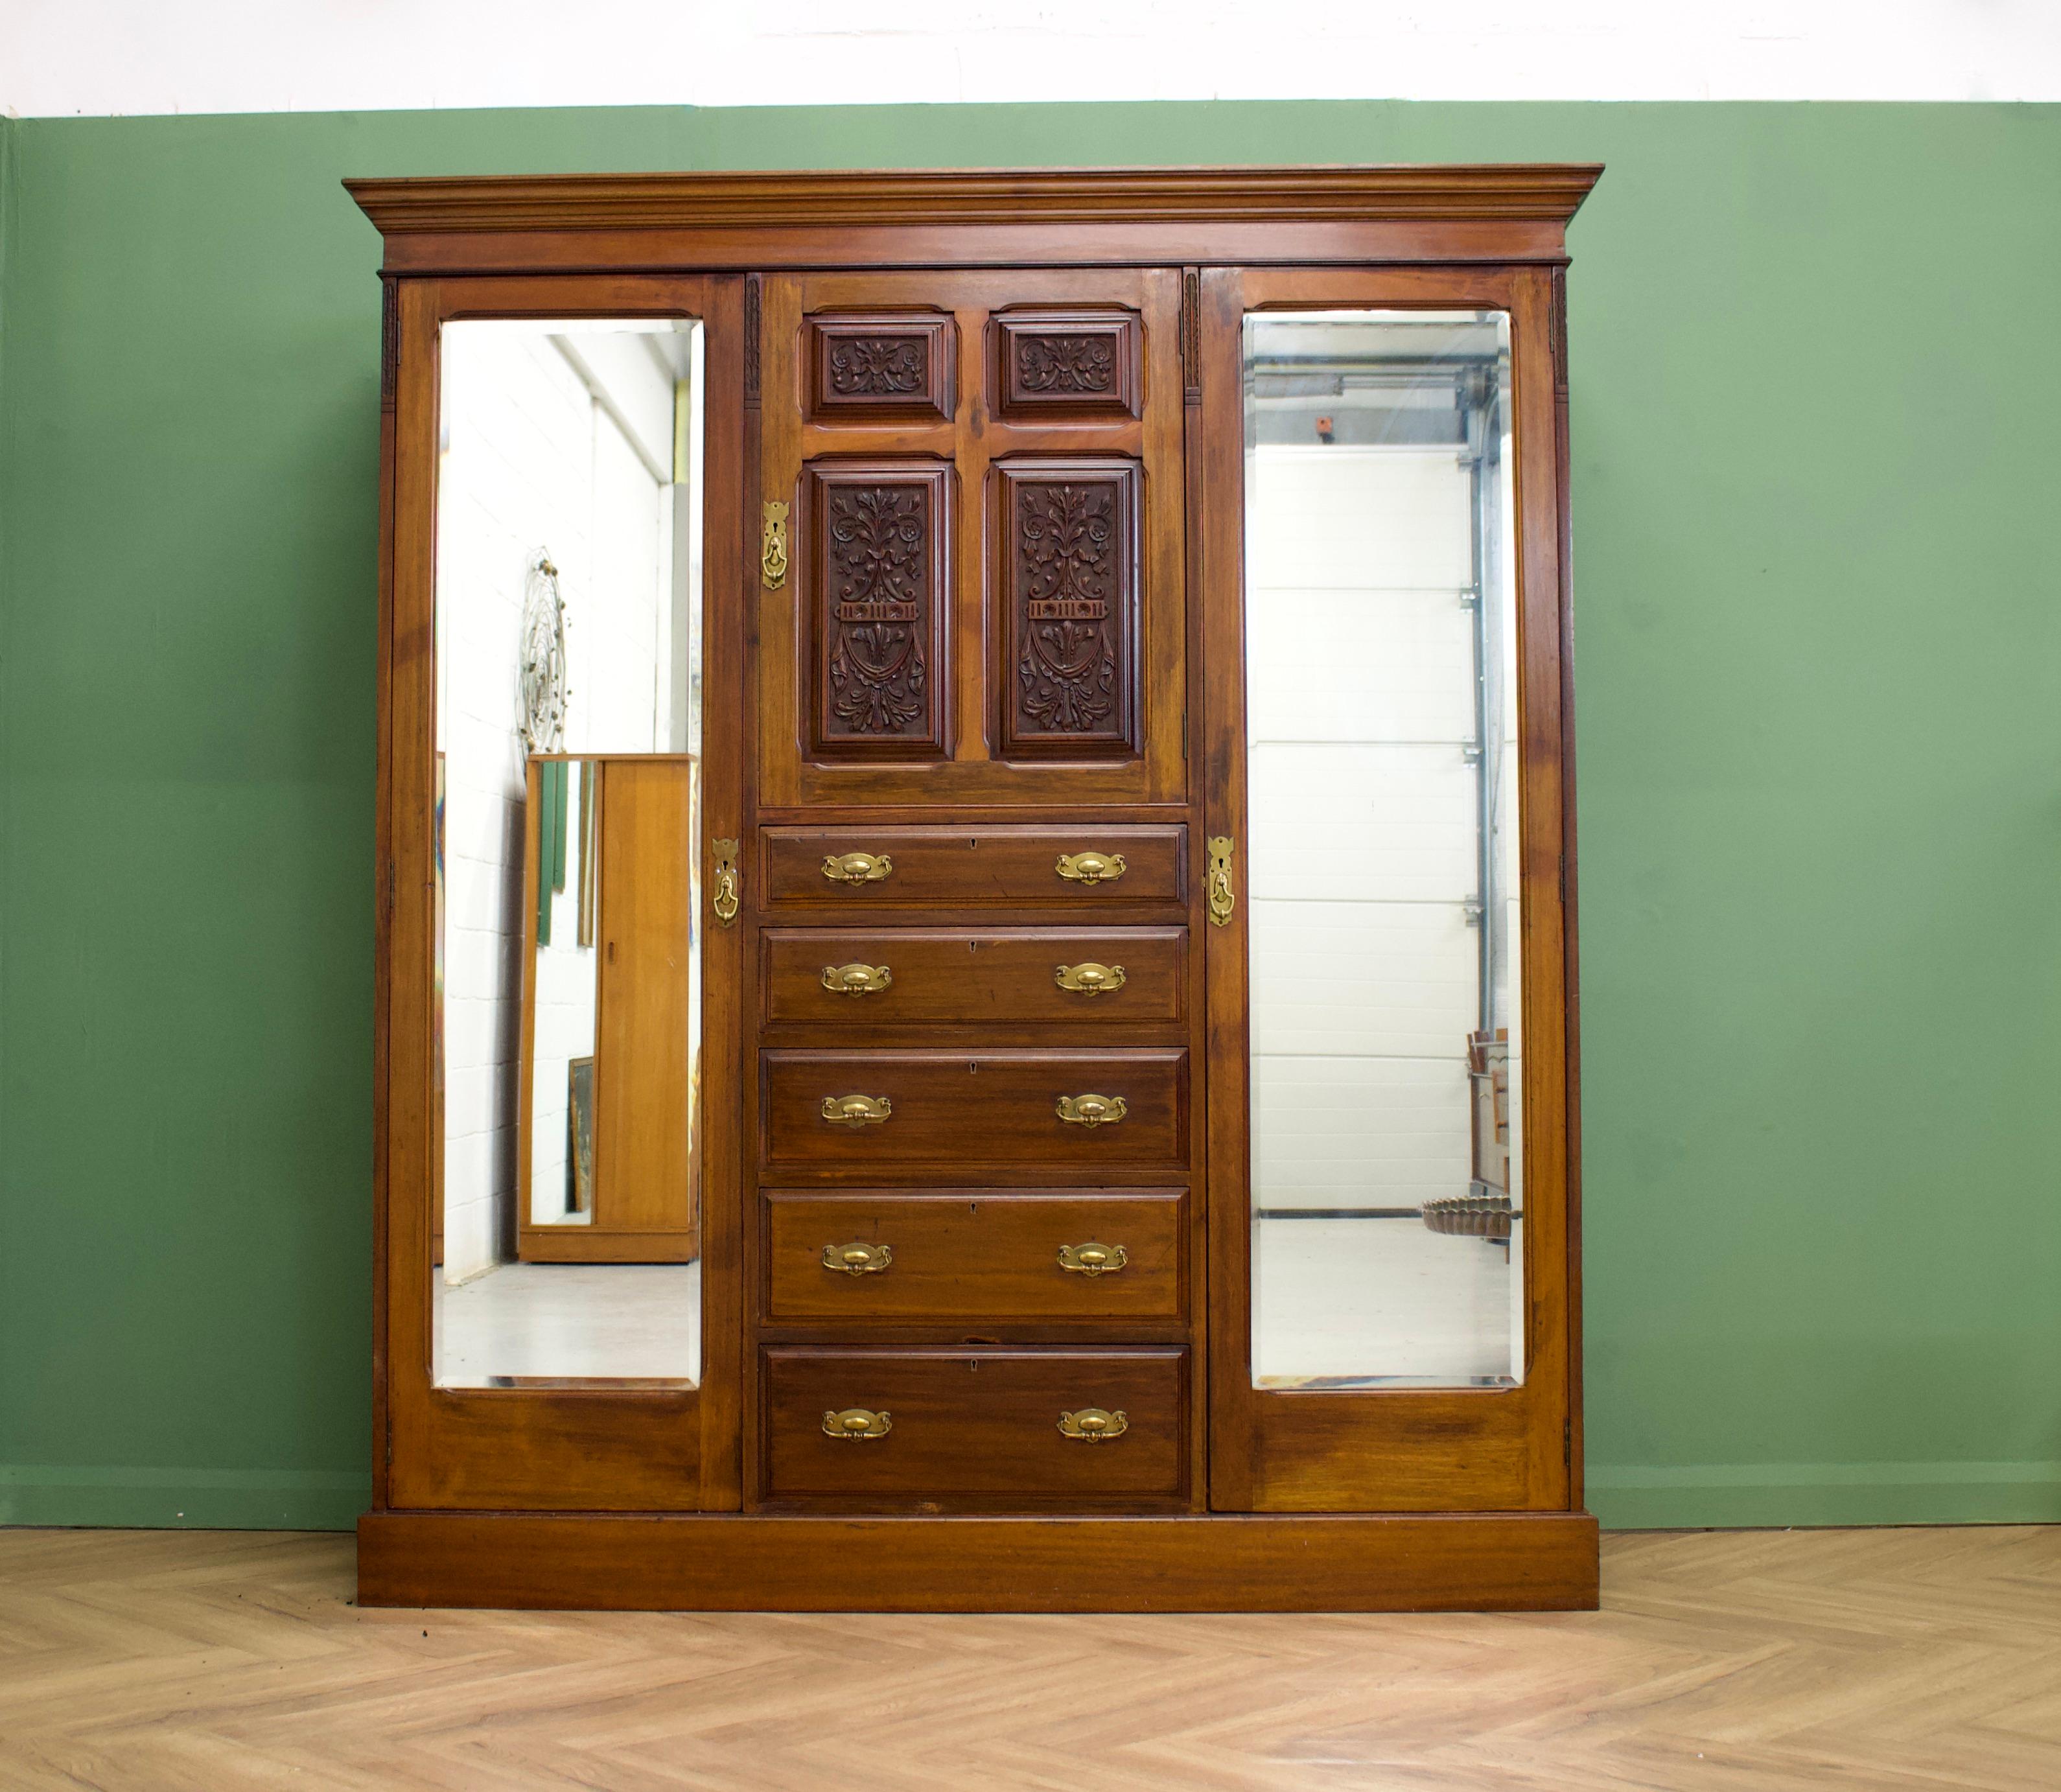 A large Edwardian mahogany compactum - Perfect to use as a freestanding hall cupboard or boot room cabinet - it can also be used as a wardrobe by adding rails to each side compartment
There are two full length hanging compartments with hanging